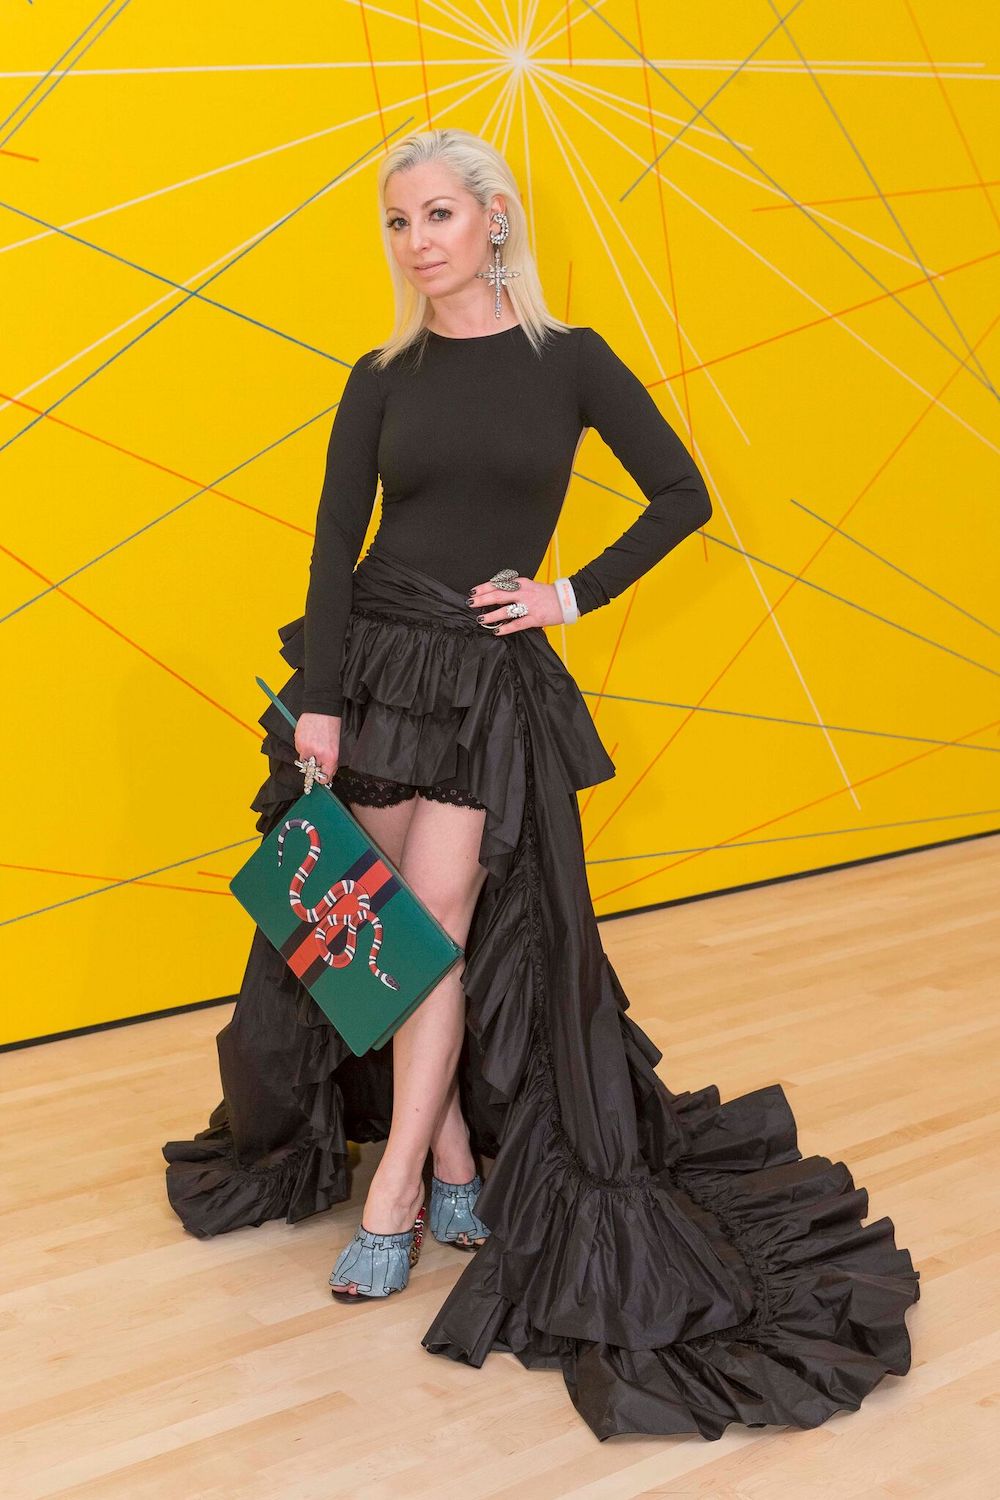 At the SFMOMA Modern Ball in 2016